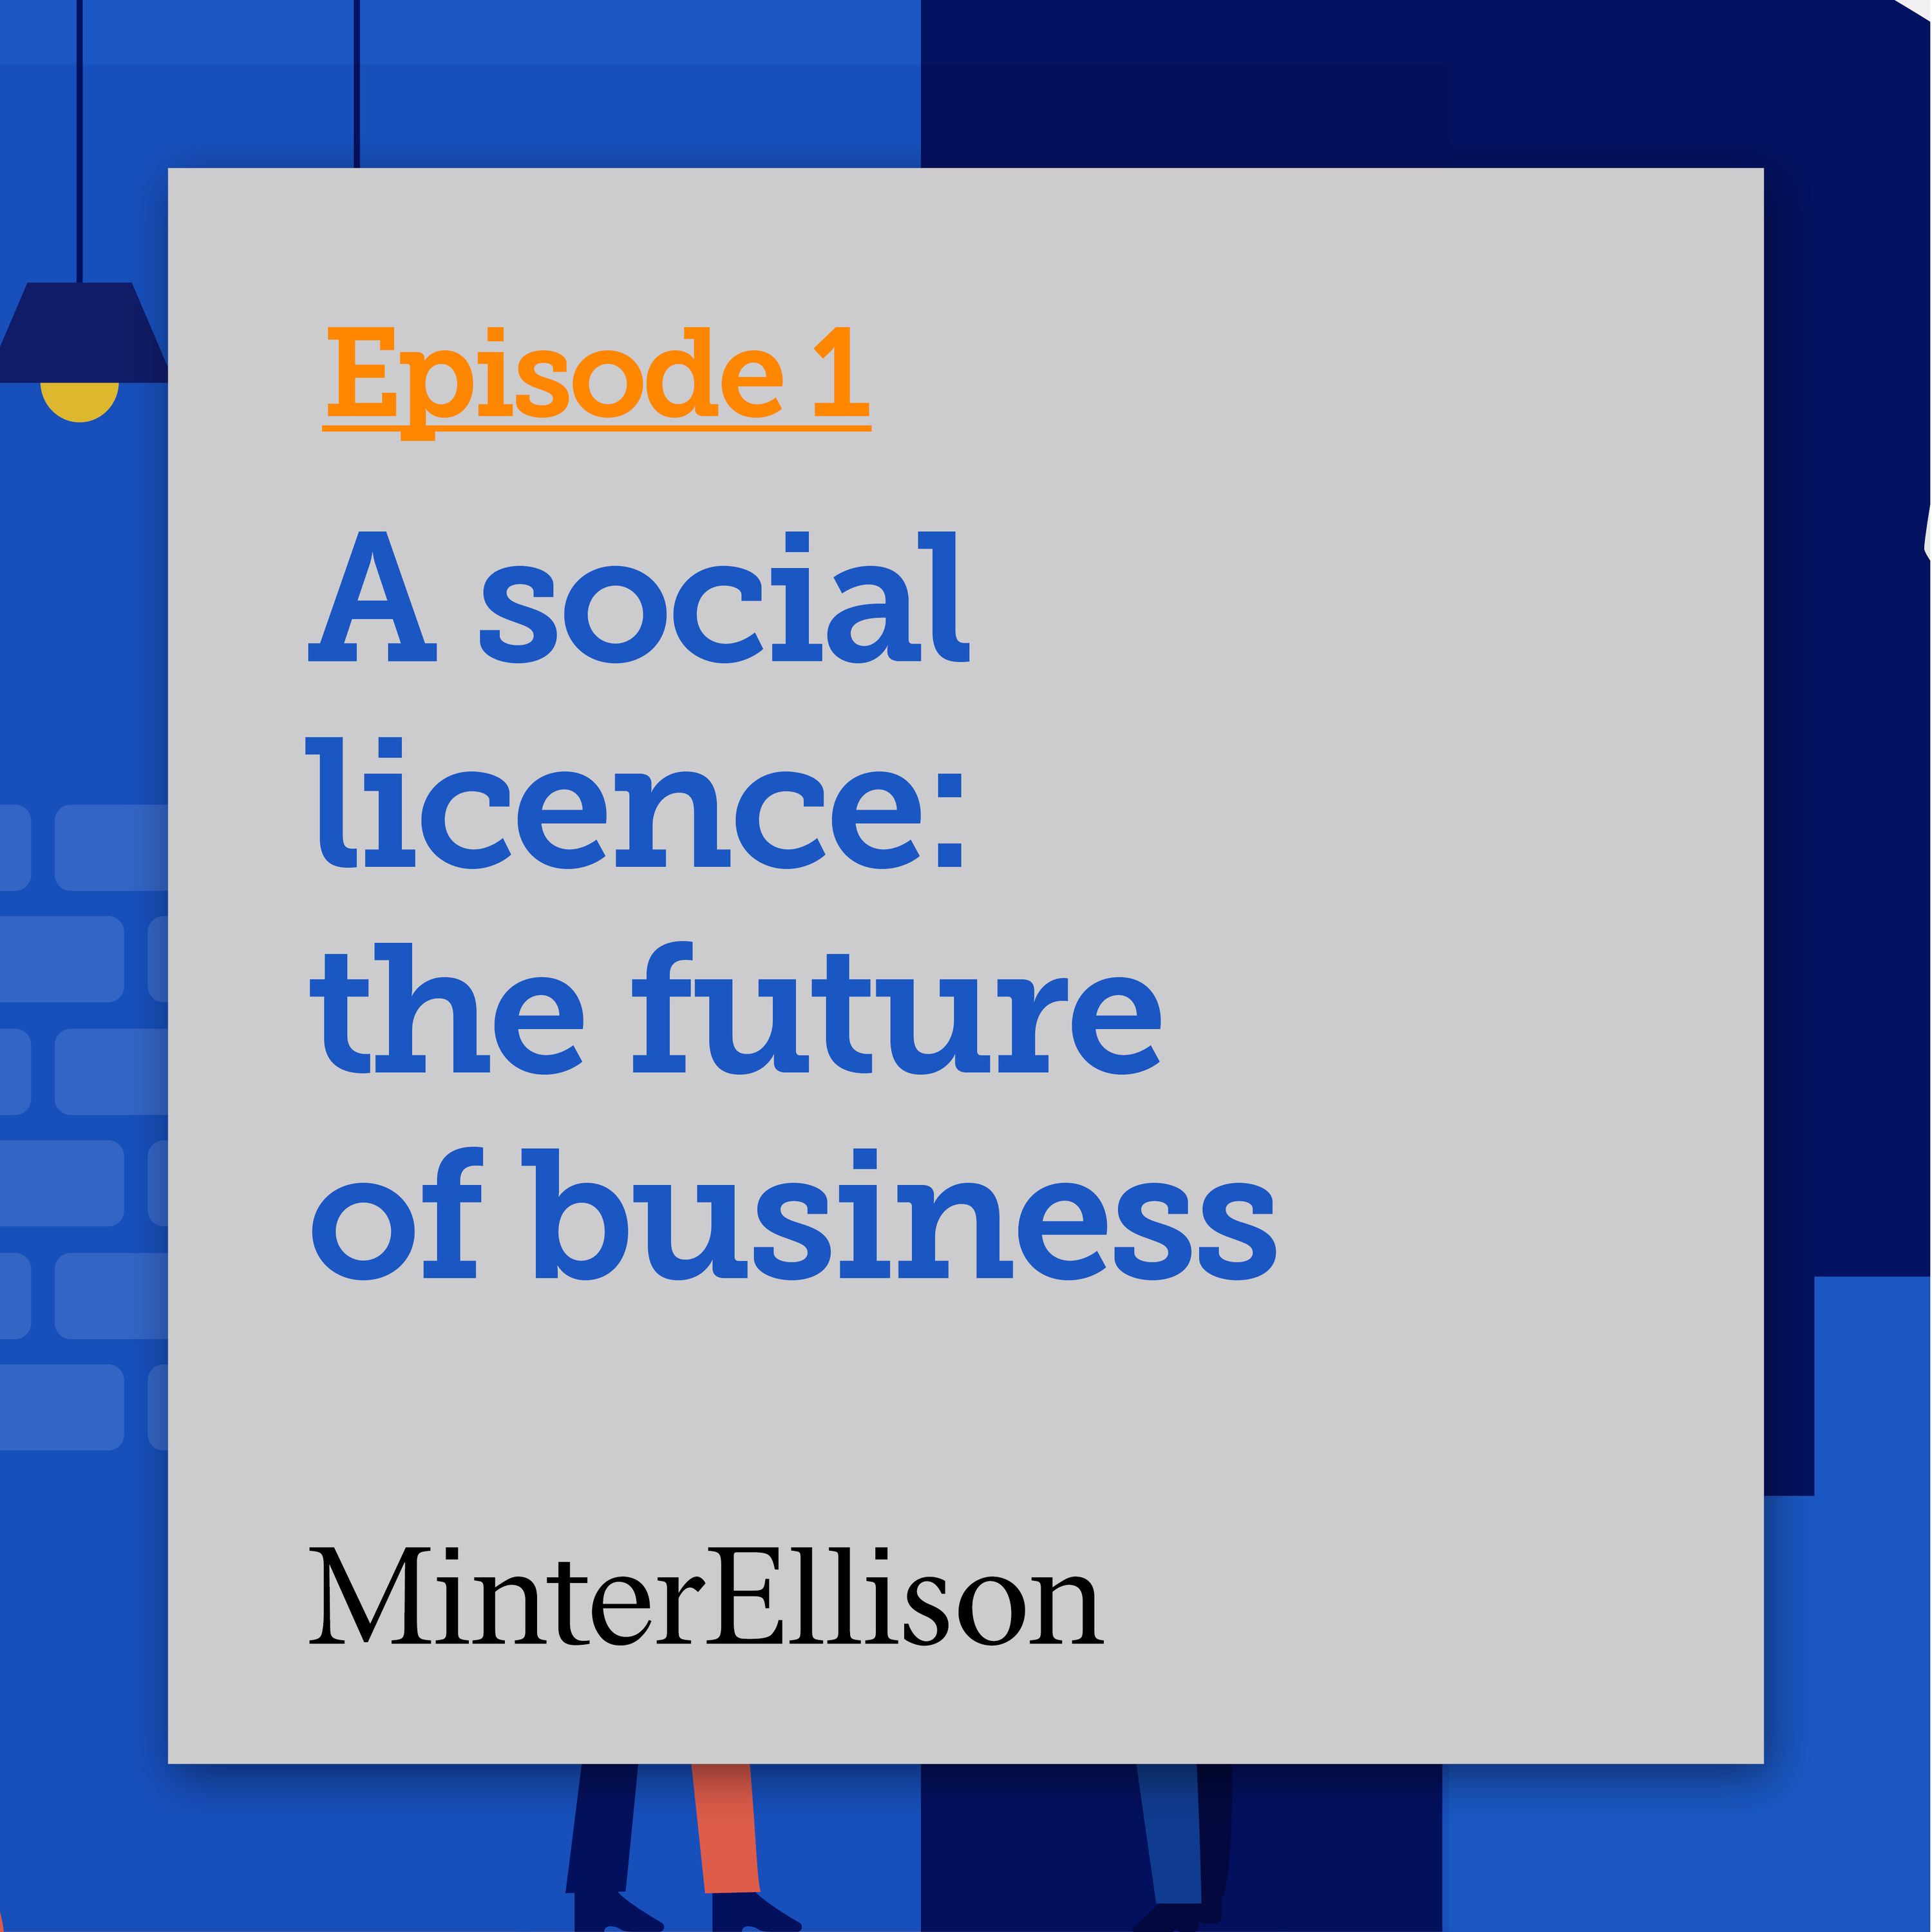 A social licence: the future of business